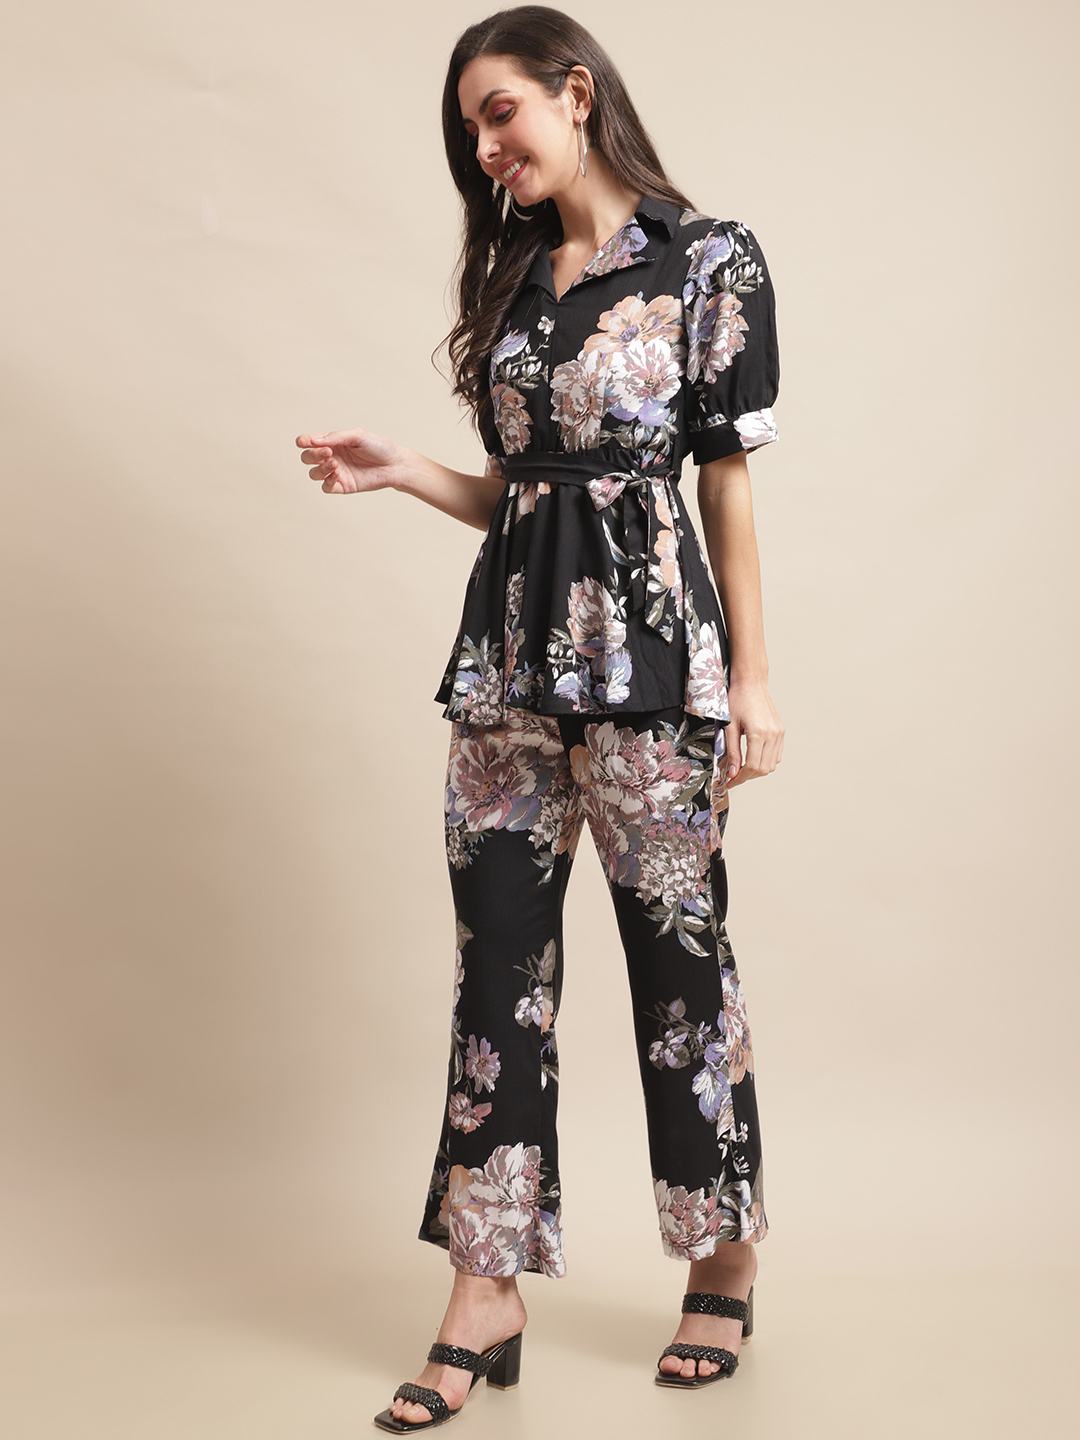 Black Color Flower Printed Viscose Rayon Co-ord Set Claura Designs Pvt. Ltd. Cord set Black, Co-ord, Ethnic, Floral, Rayon, Western